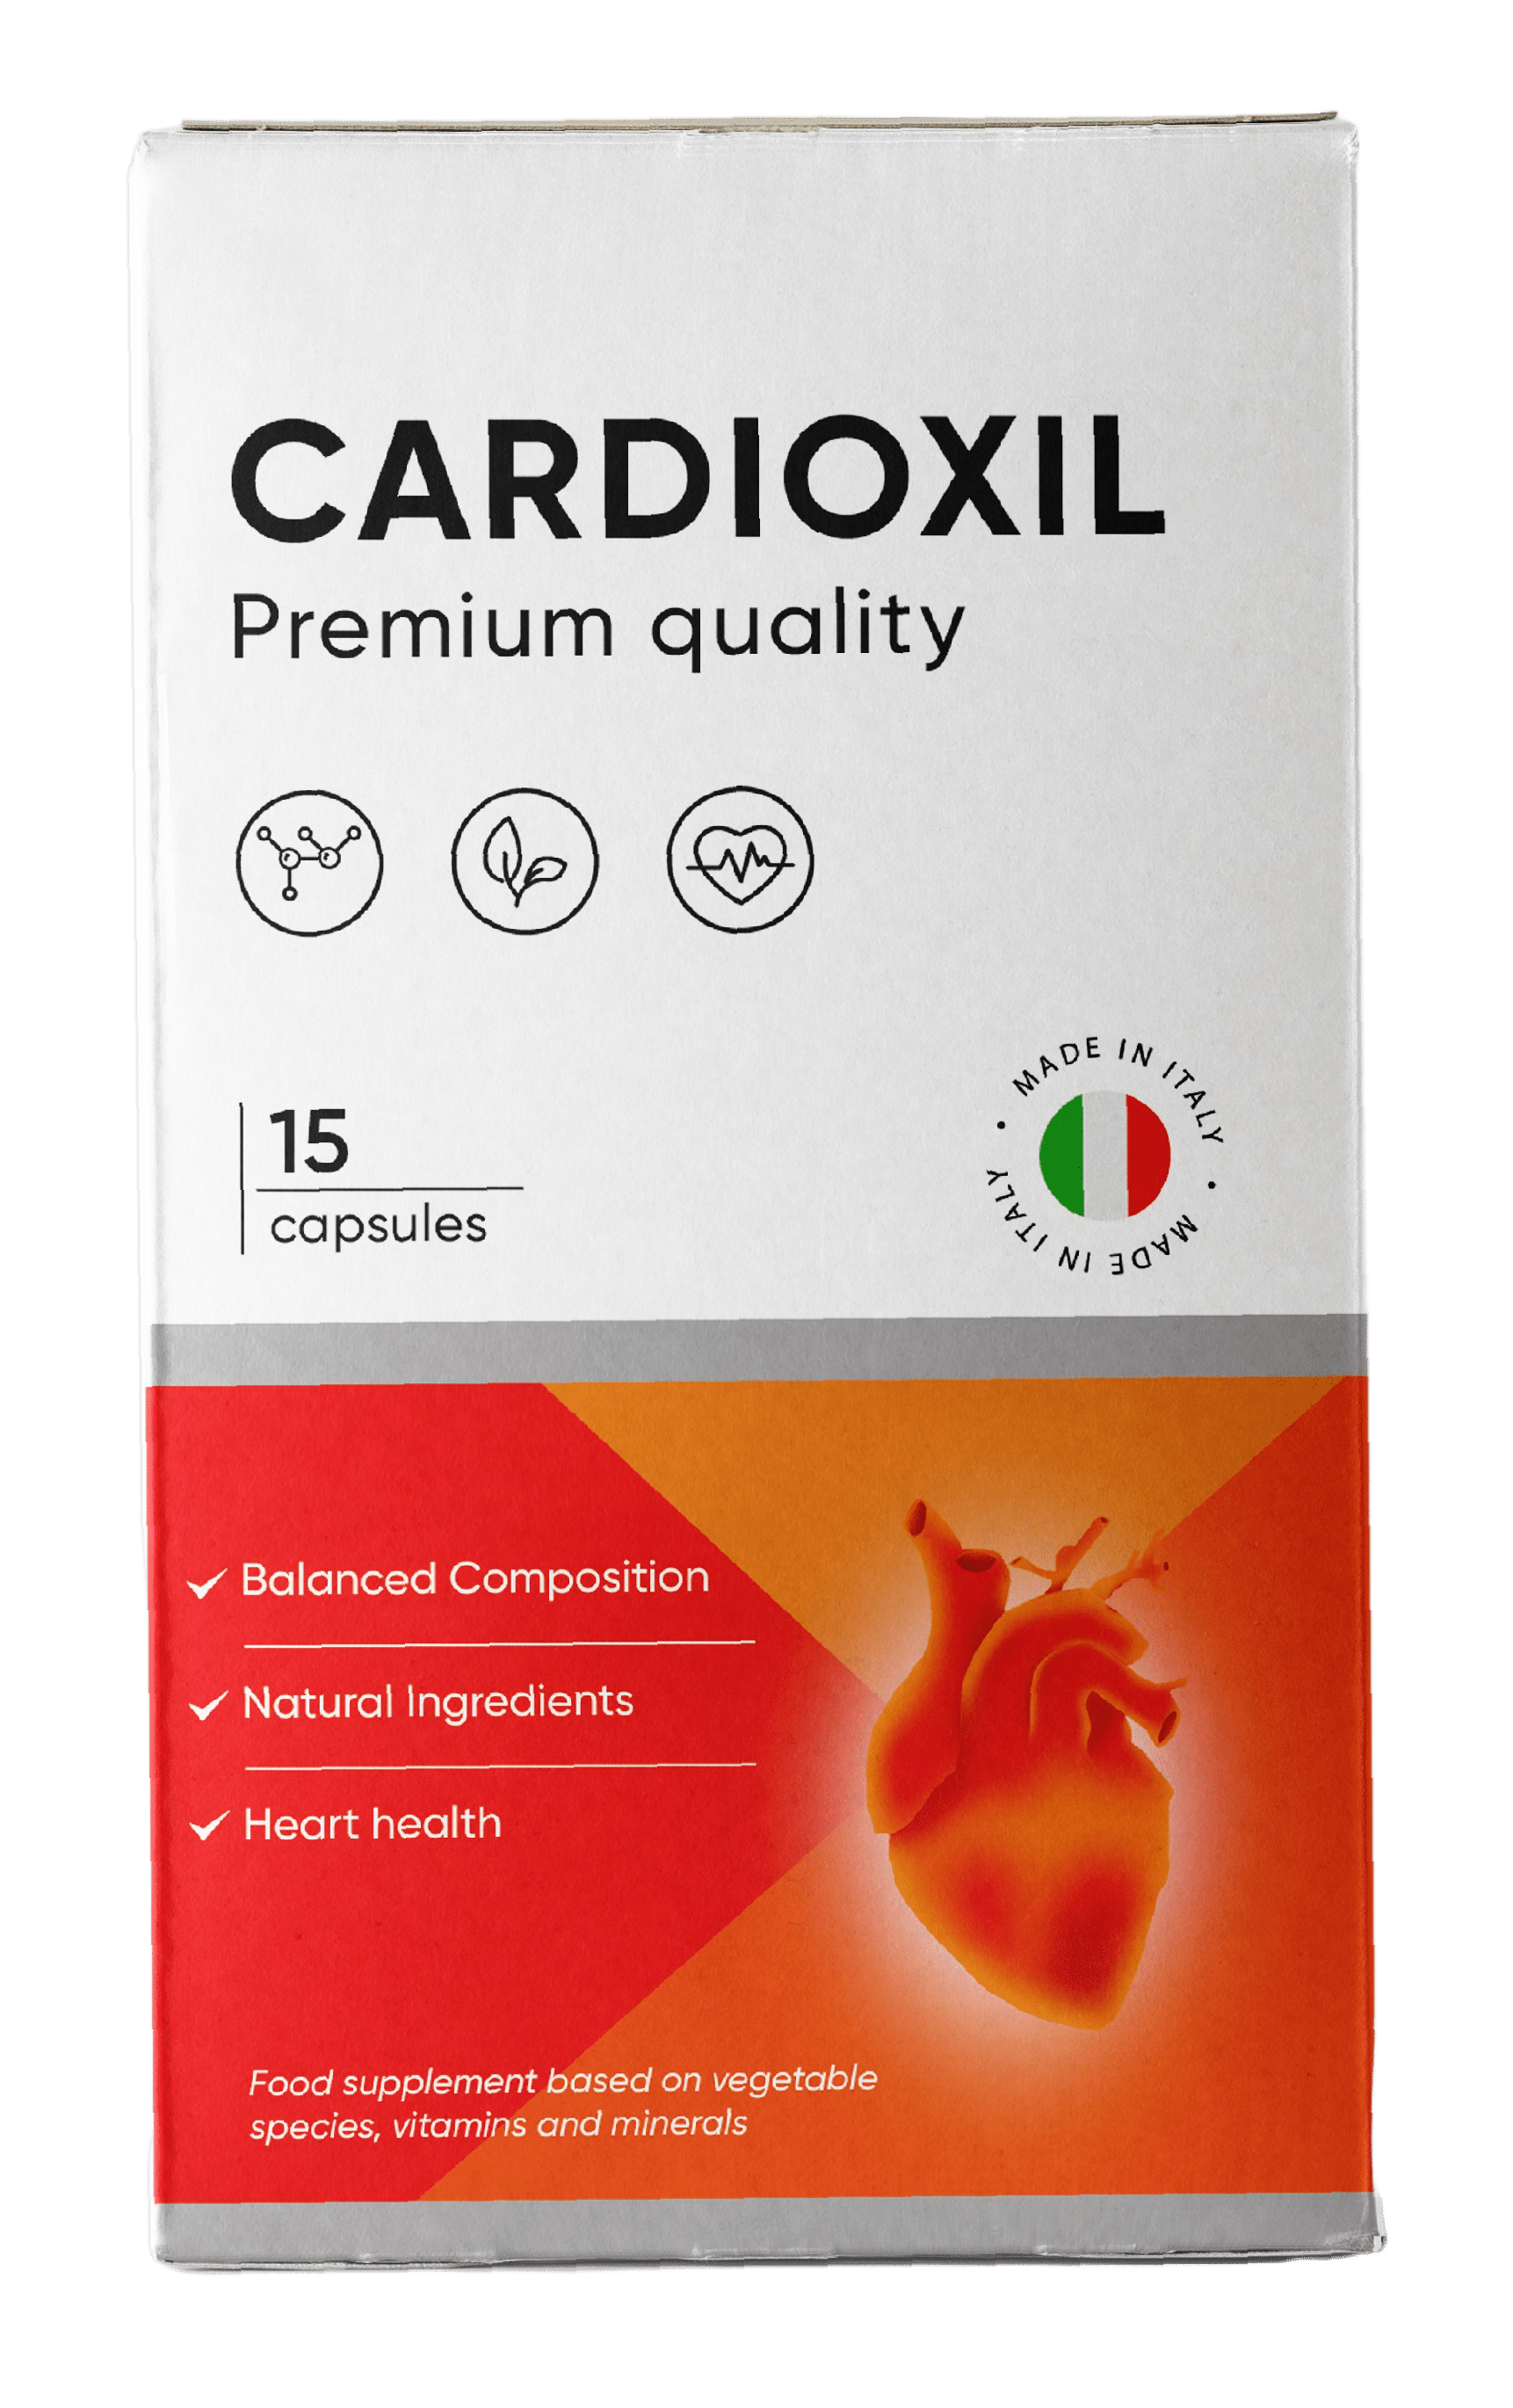 Cardioxil - what is it